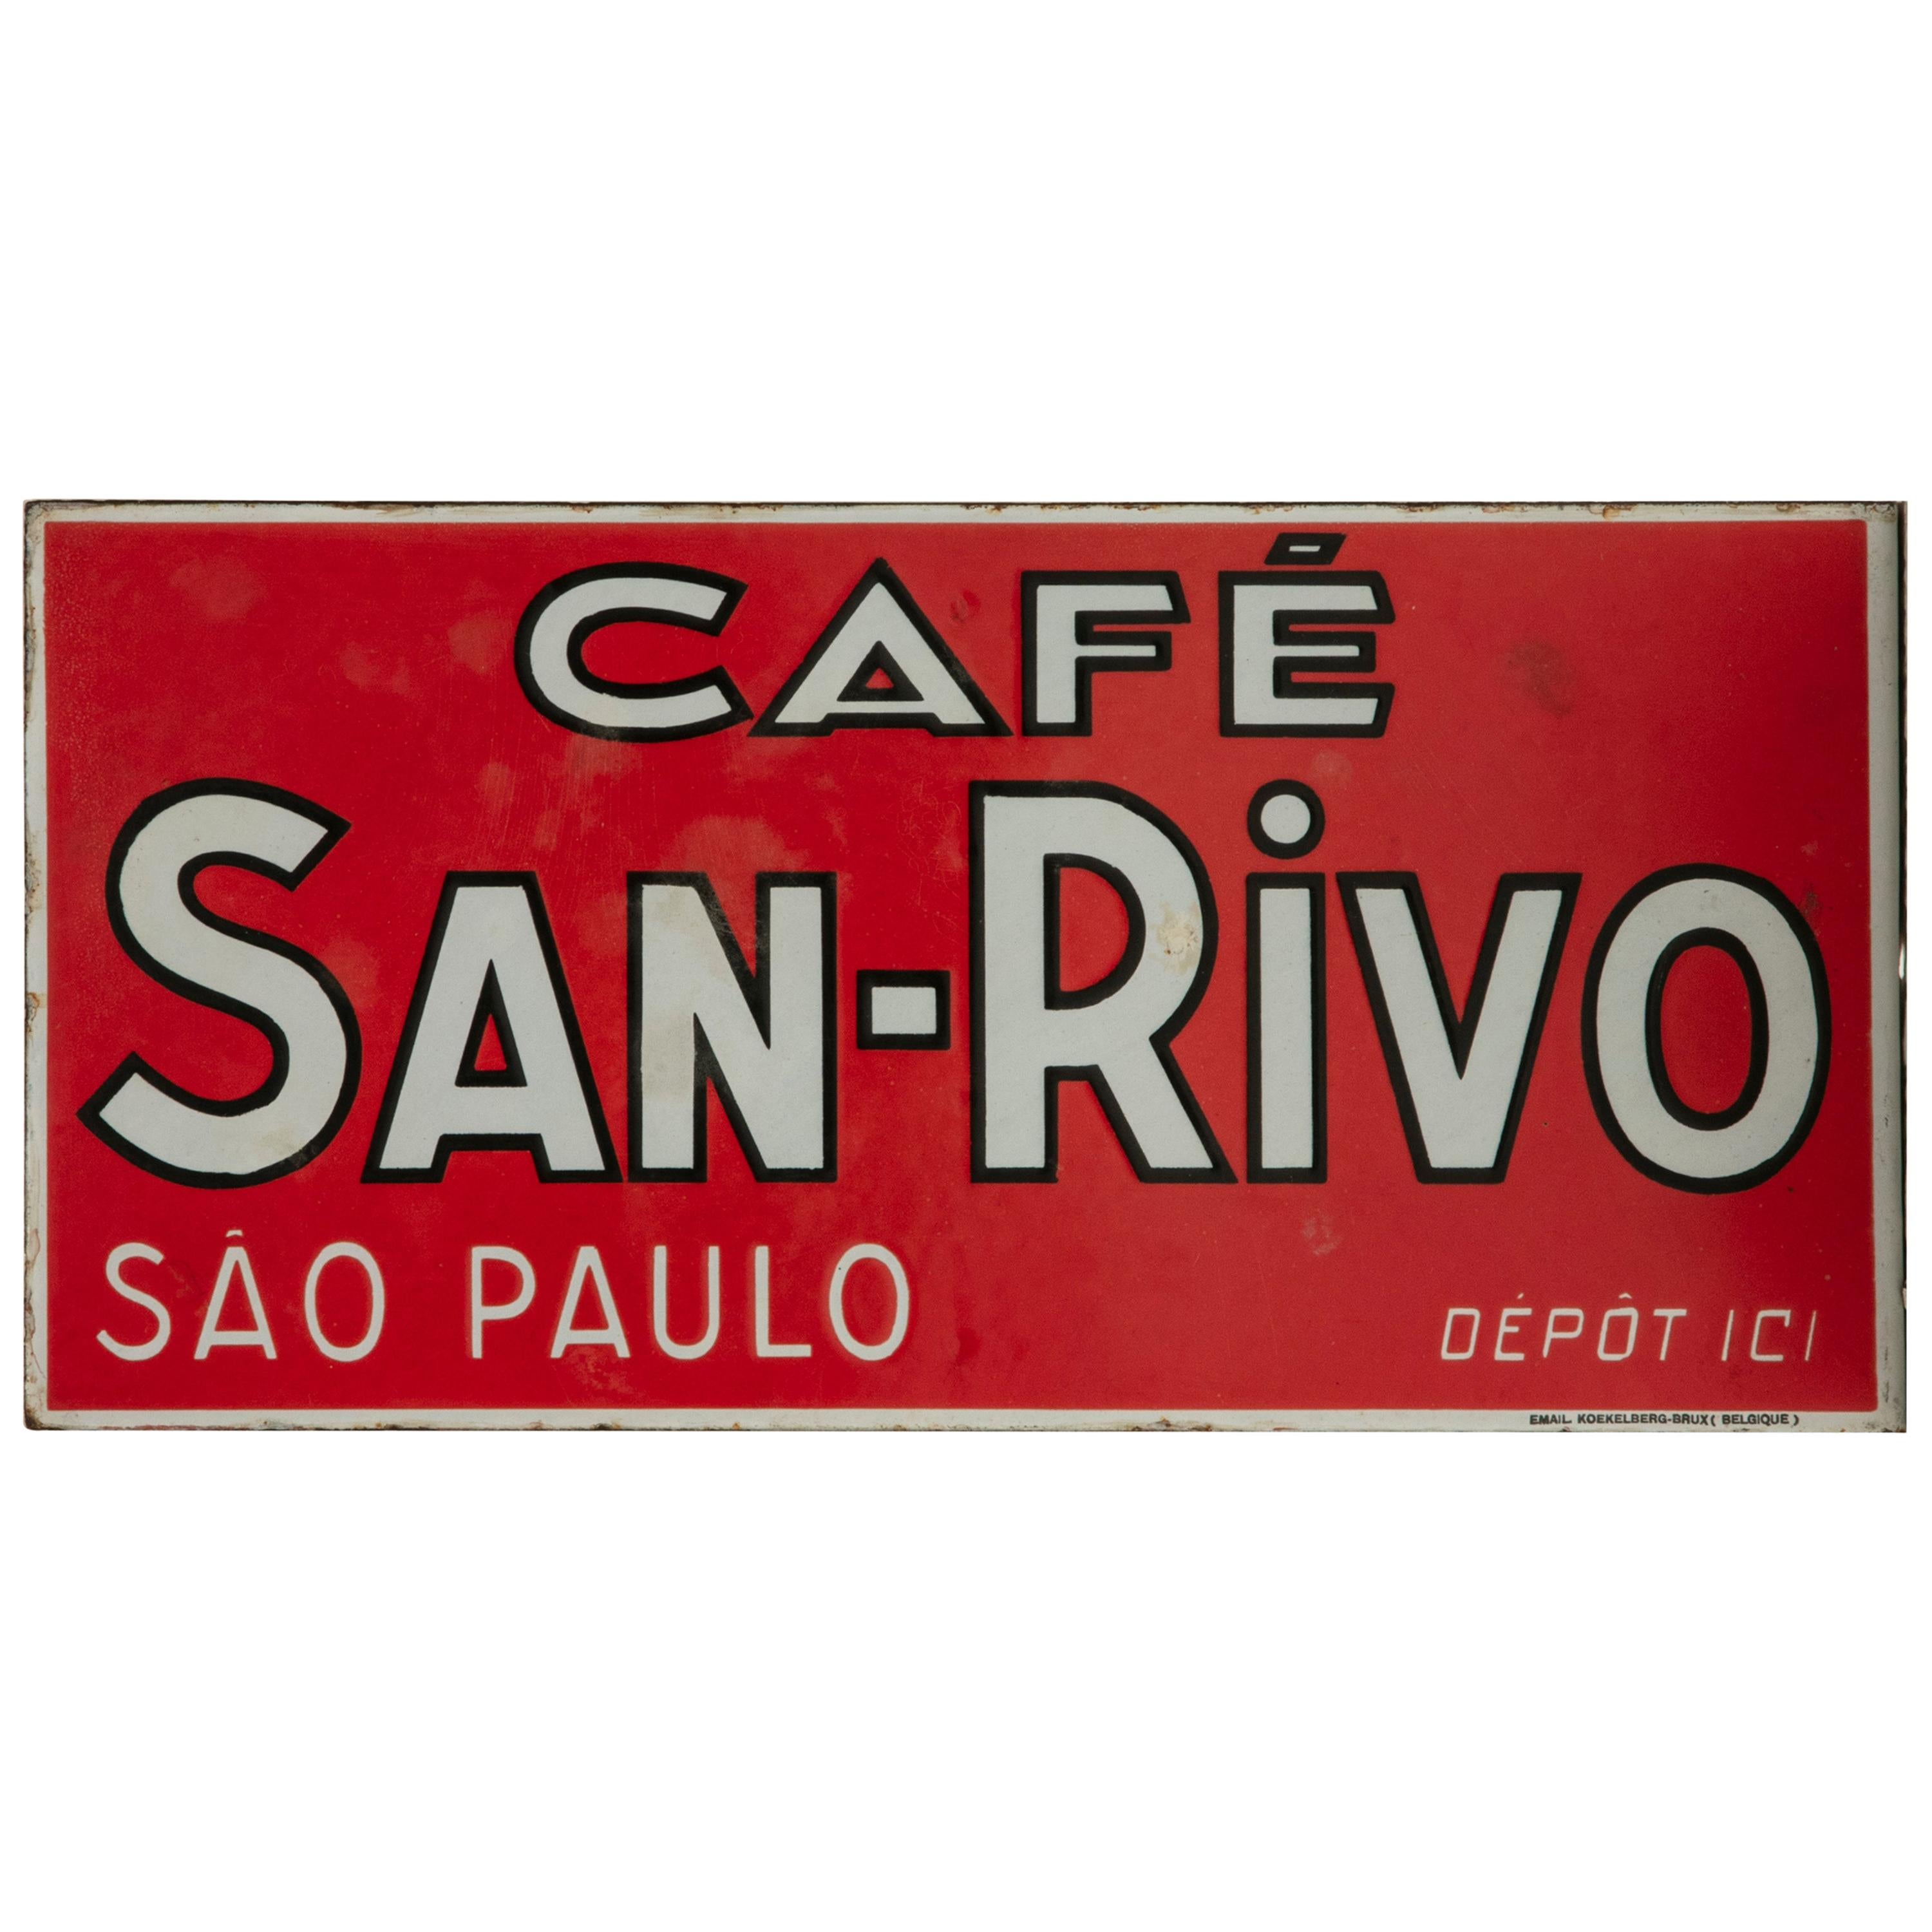 Mid-20th Century French Enameled Metal Sign for Cafe San Rivo in Sao Paulo